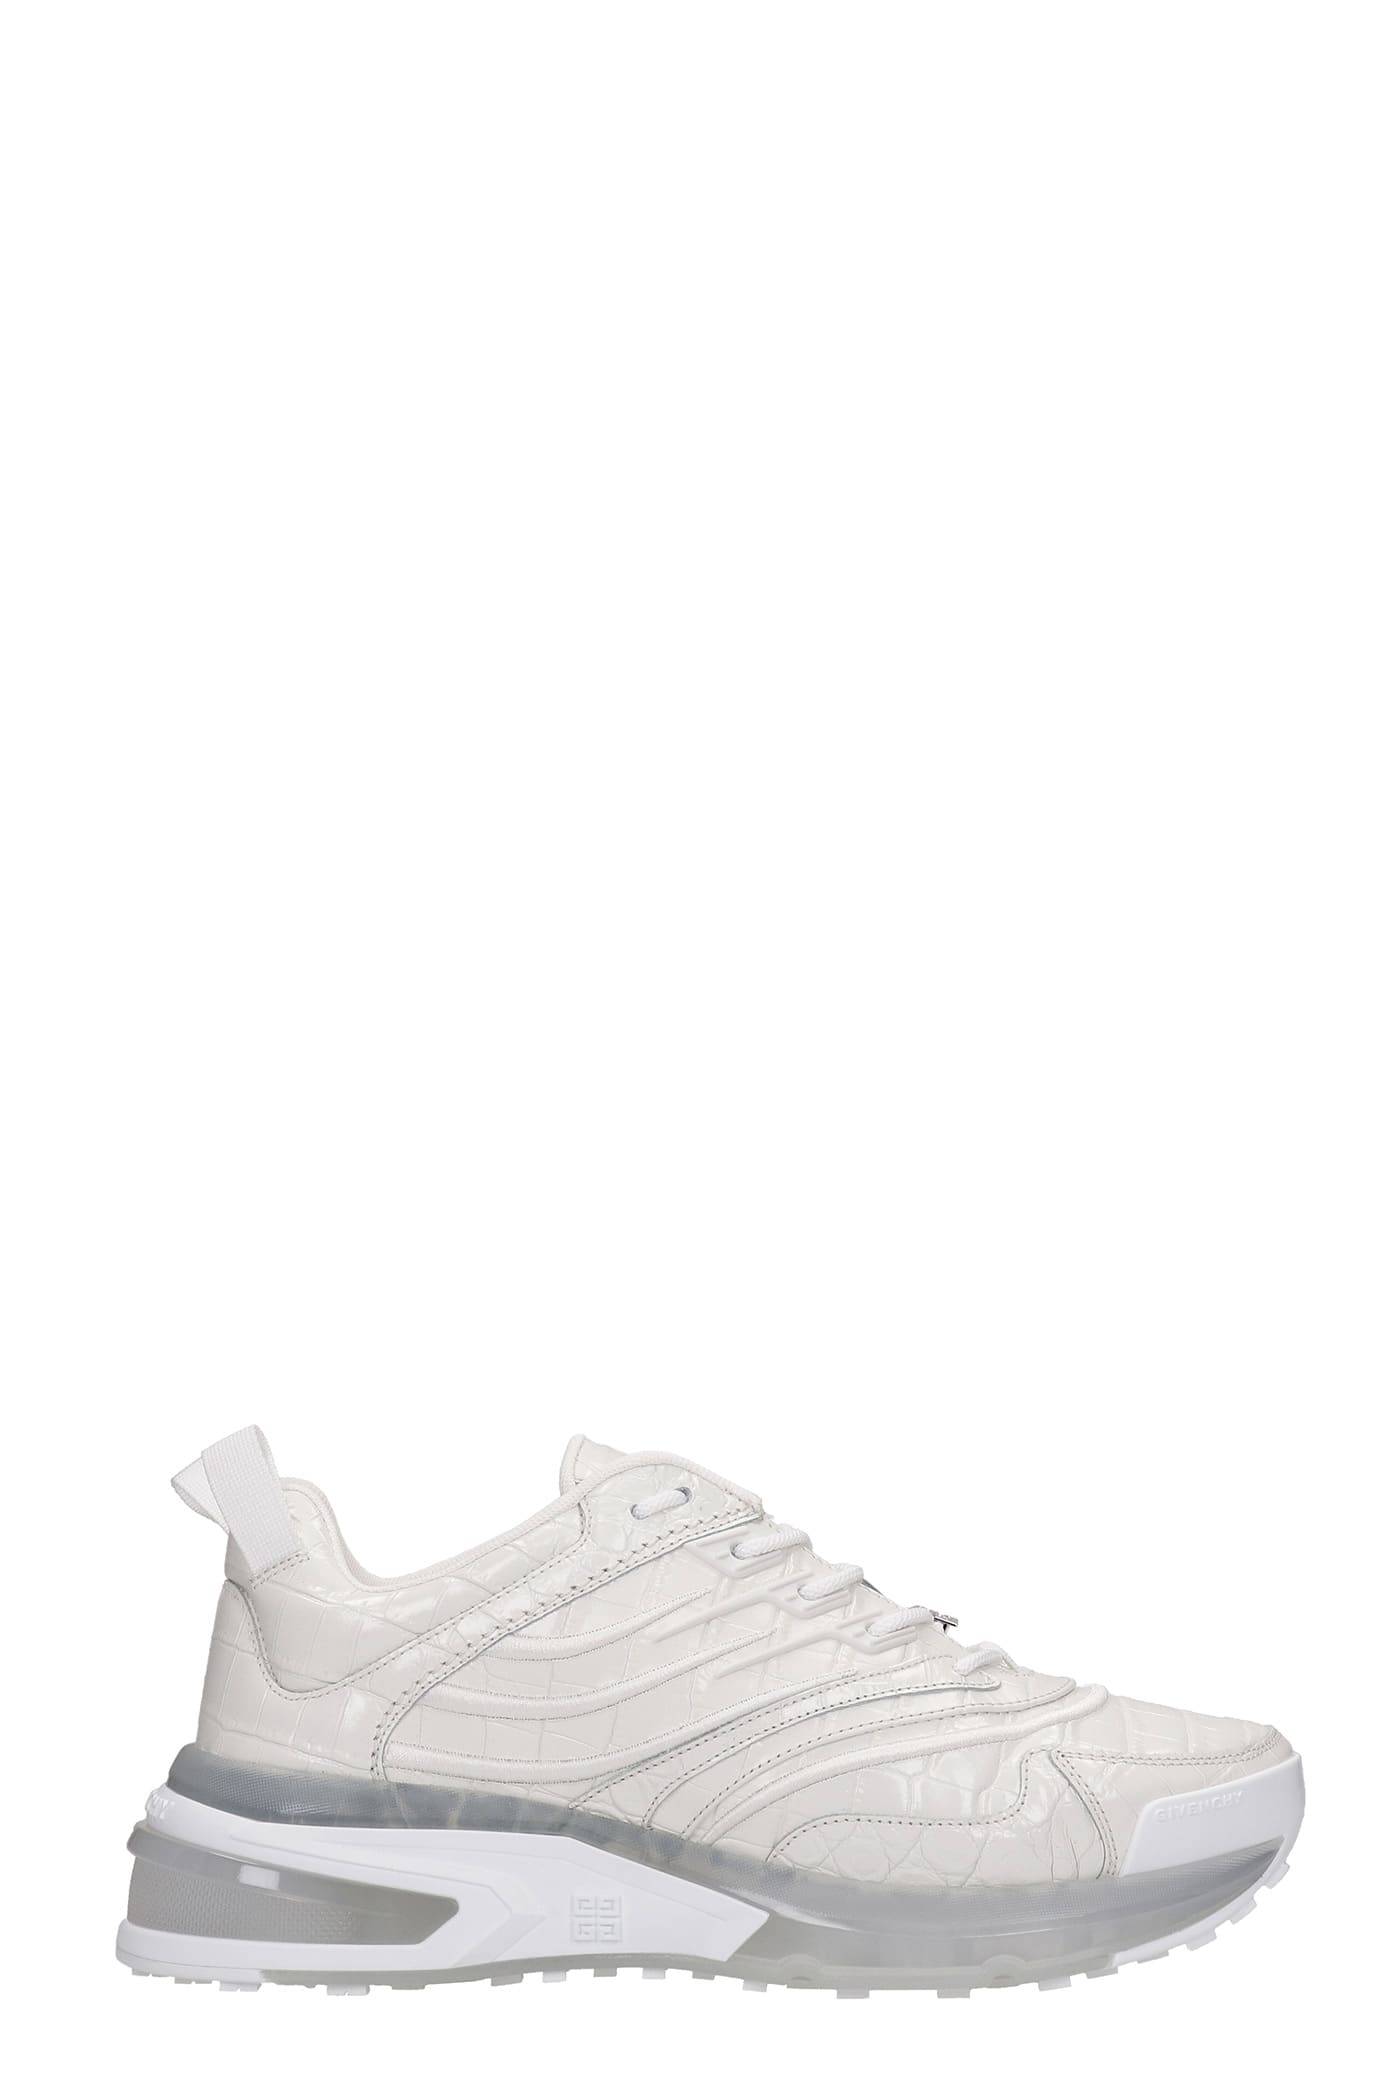 Givenchy Giv 1 Sneakers In White Synthetic Fibers